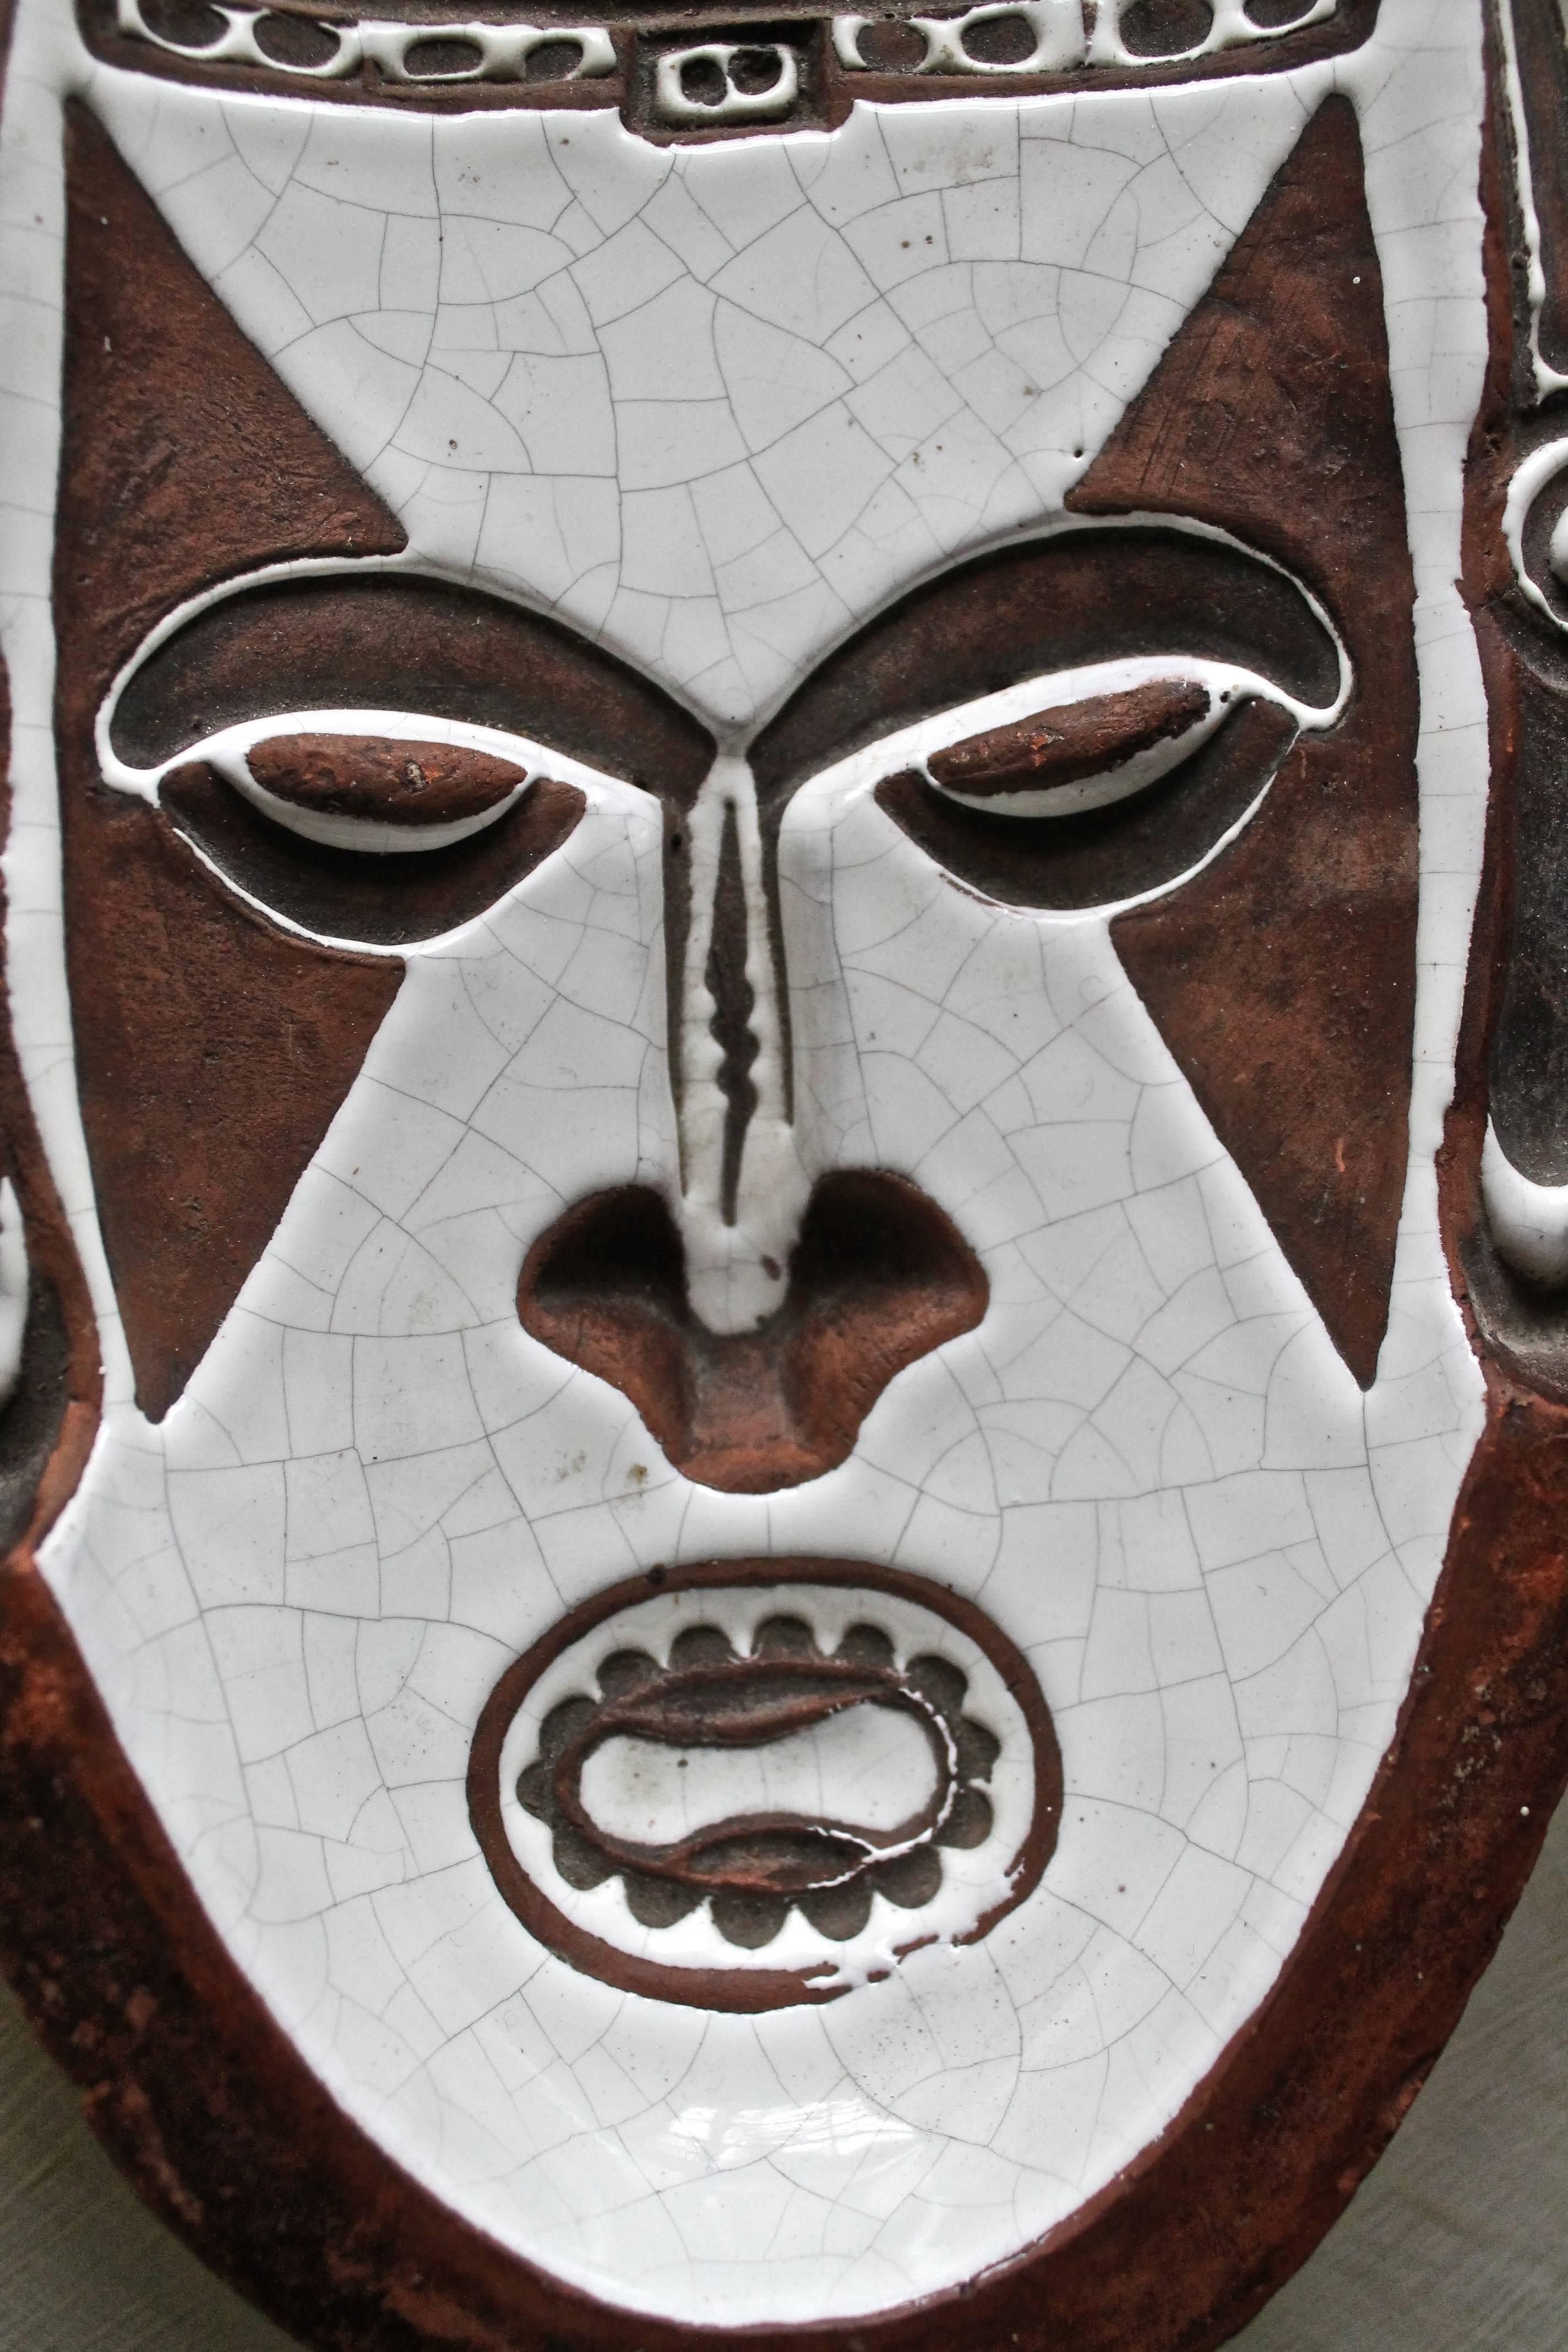 A low intaglio relief of a tribal mask, white crackle glaze on brown fired clay. Remnants of painted signature on bottom.